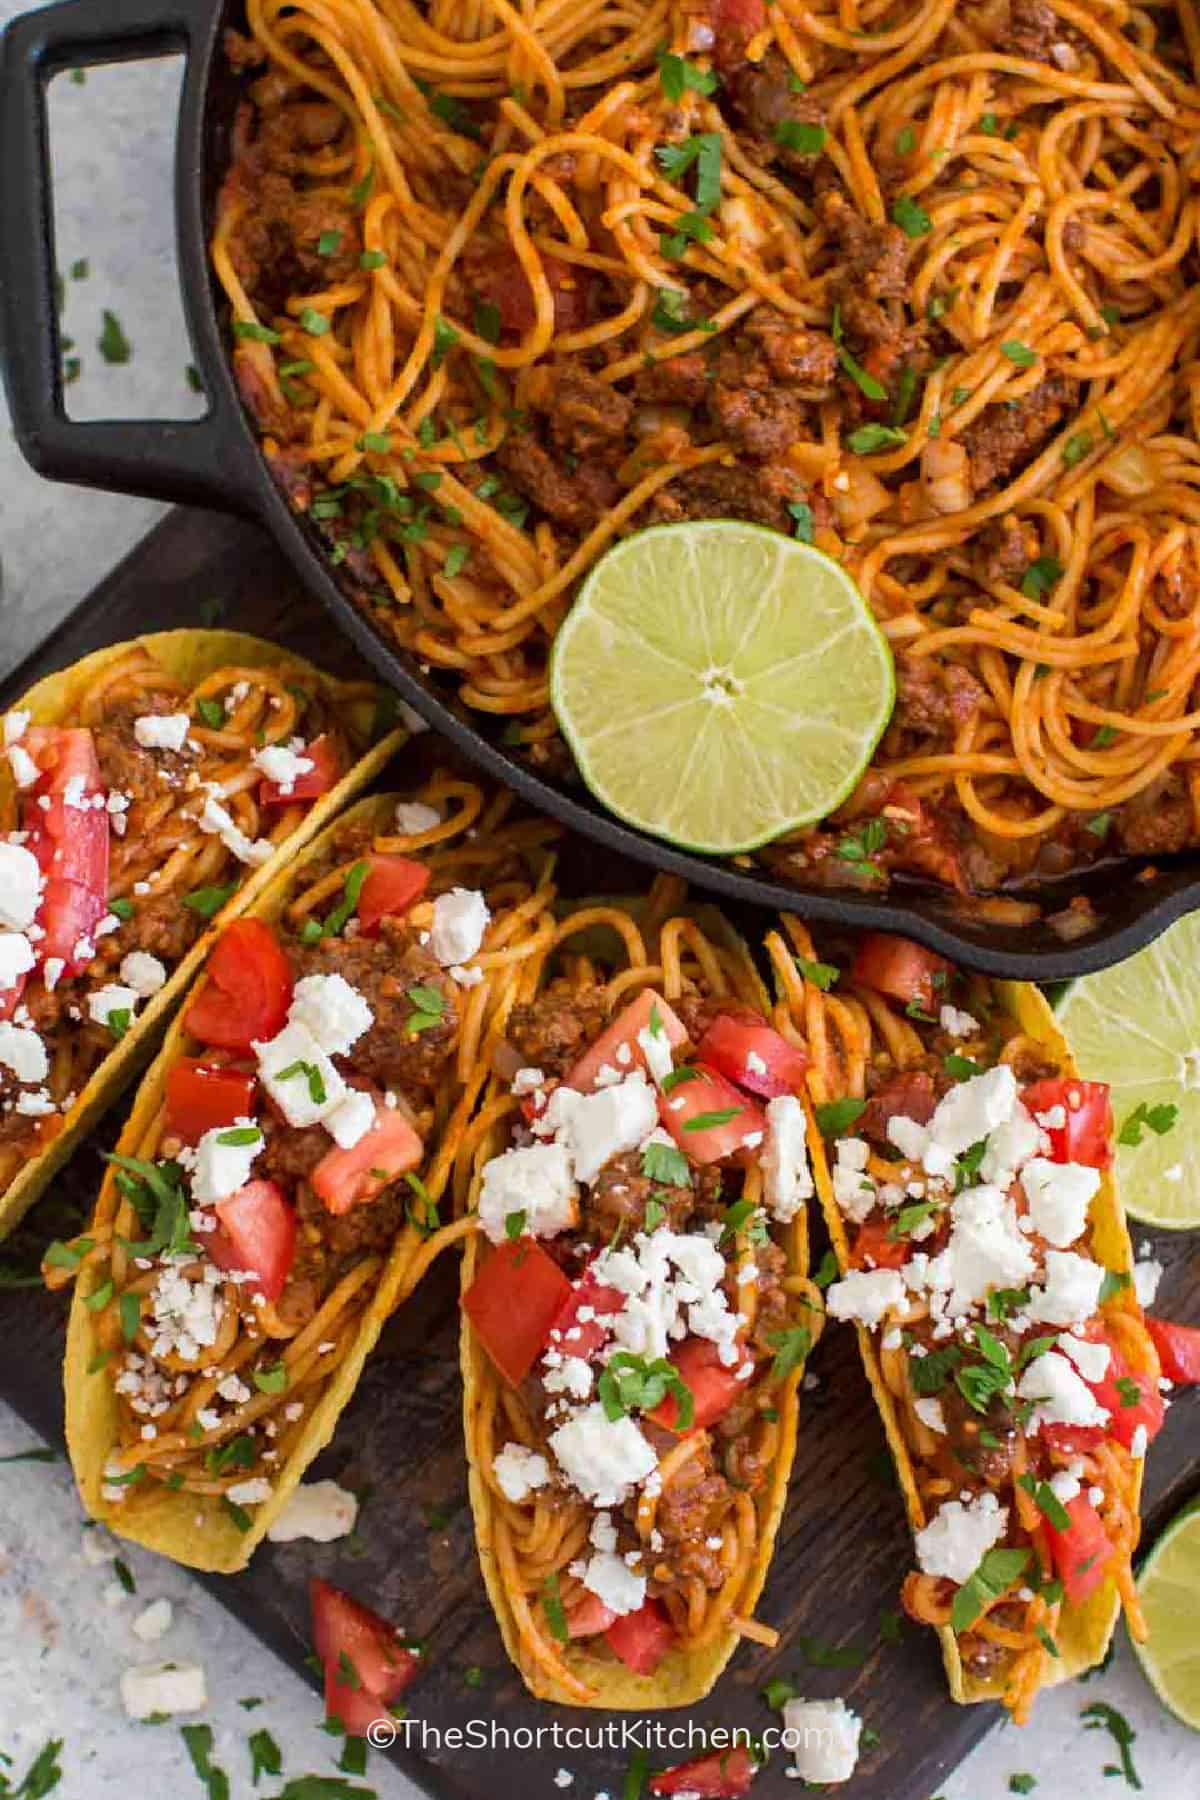 Four spaghetti tacos on a wooden board with spaghetti taco pasta in a skillet